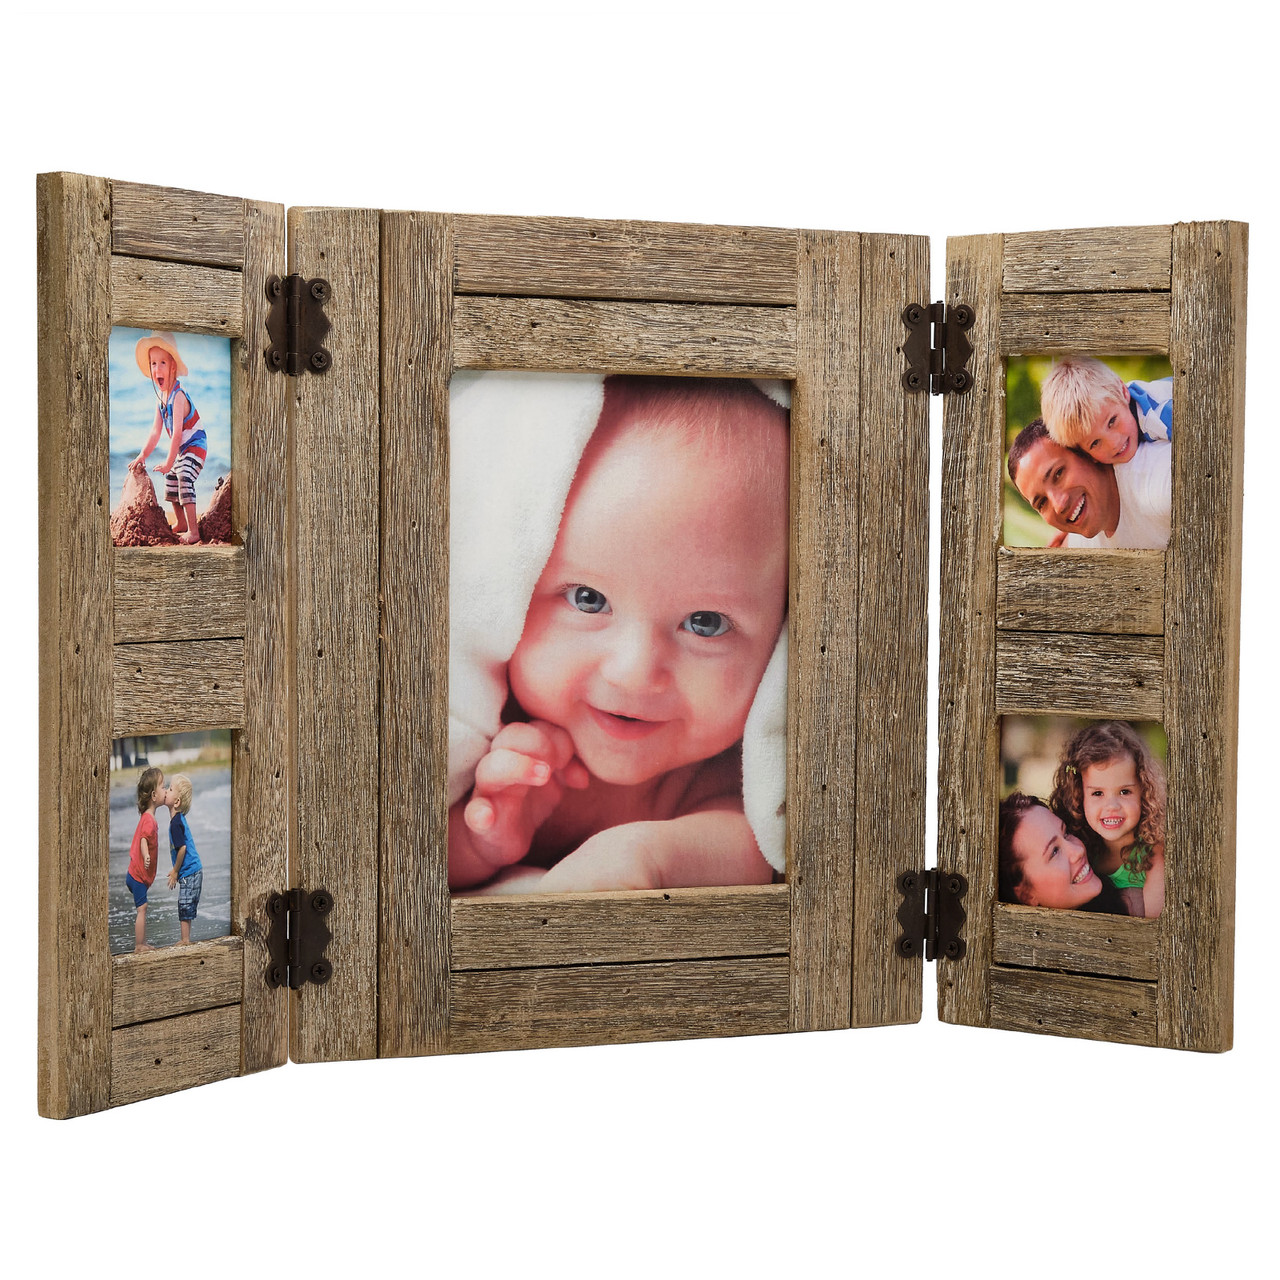  EXCELLO GLOBAL PRODUCTS Barndoor Collage Frame Holds